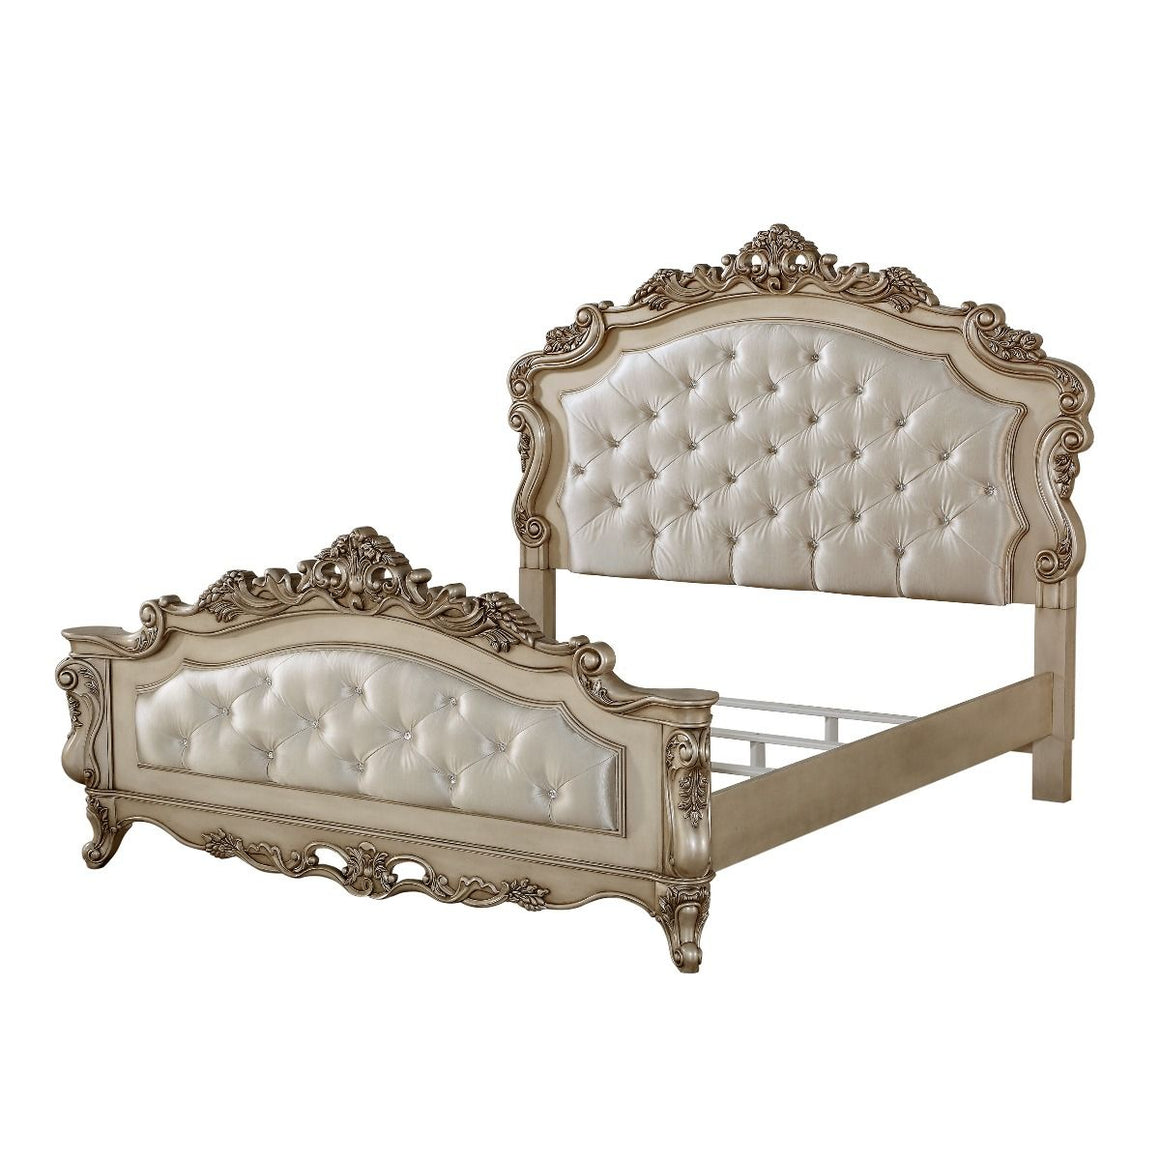 Gorsedd Bedroom Collection - Antiqued Champagne